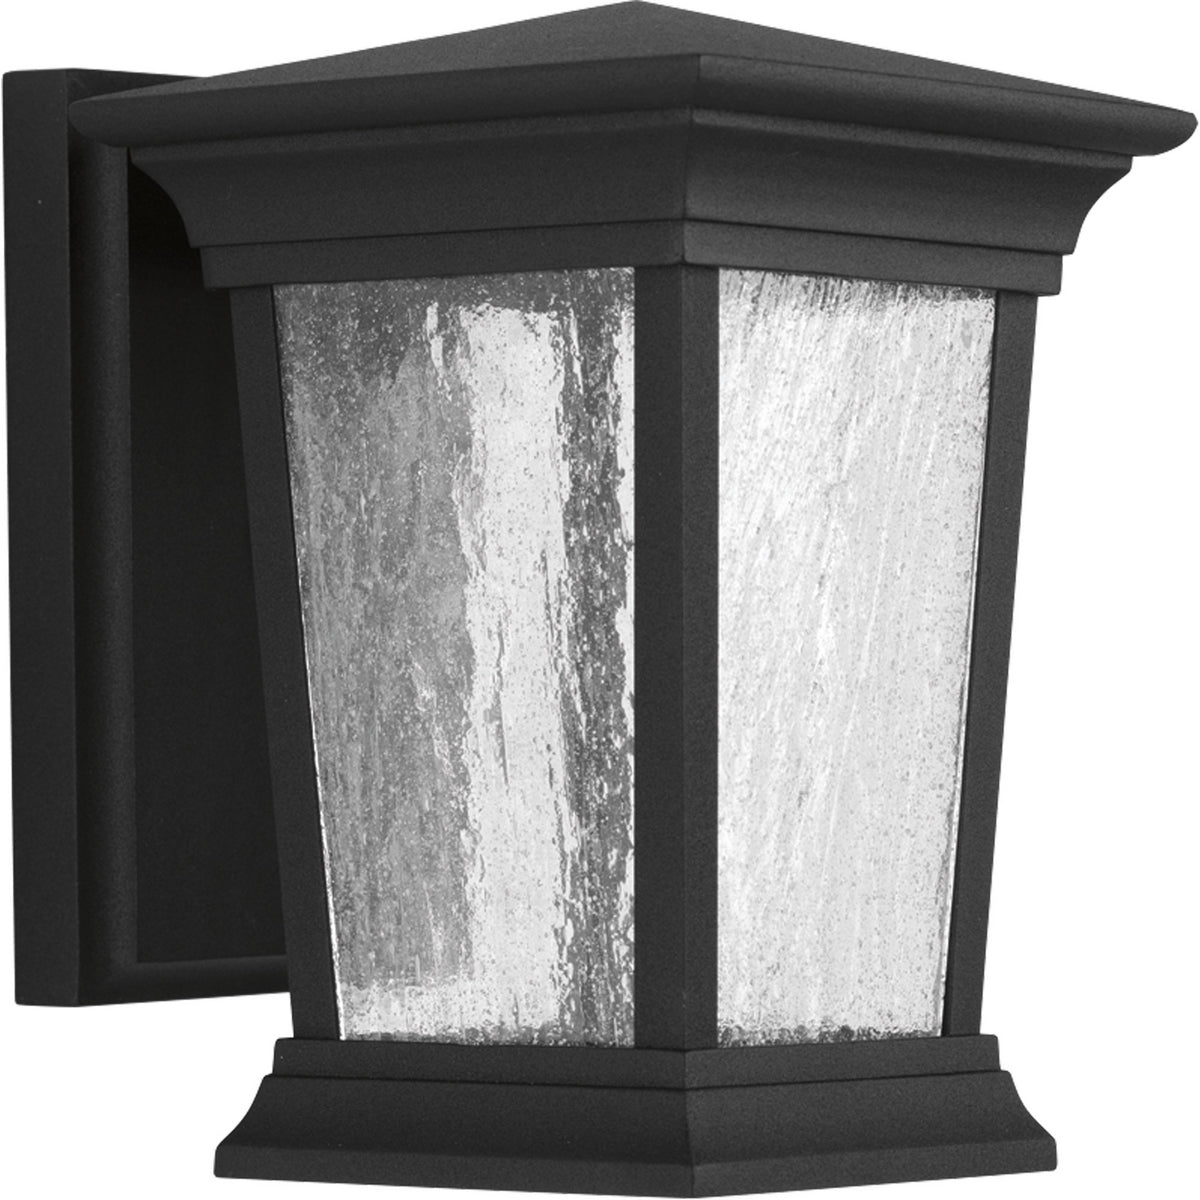 Arrive LED Outdoor Wall Light